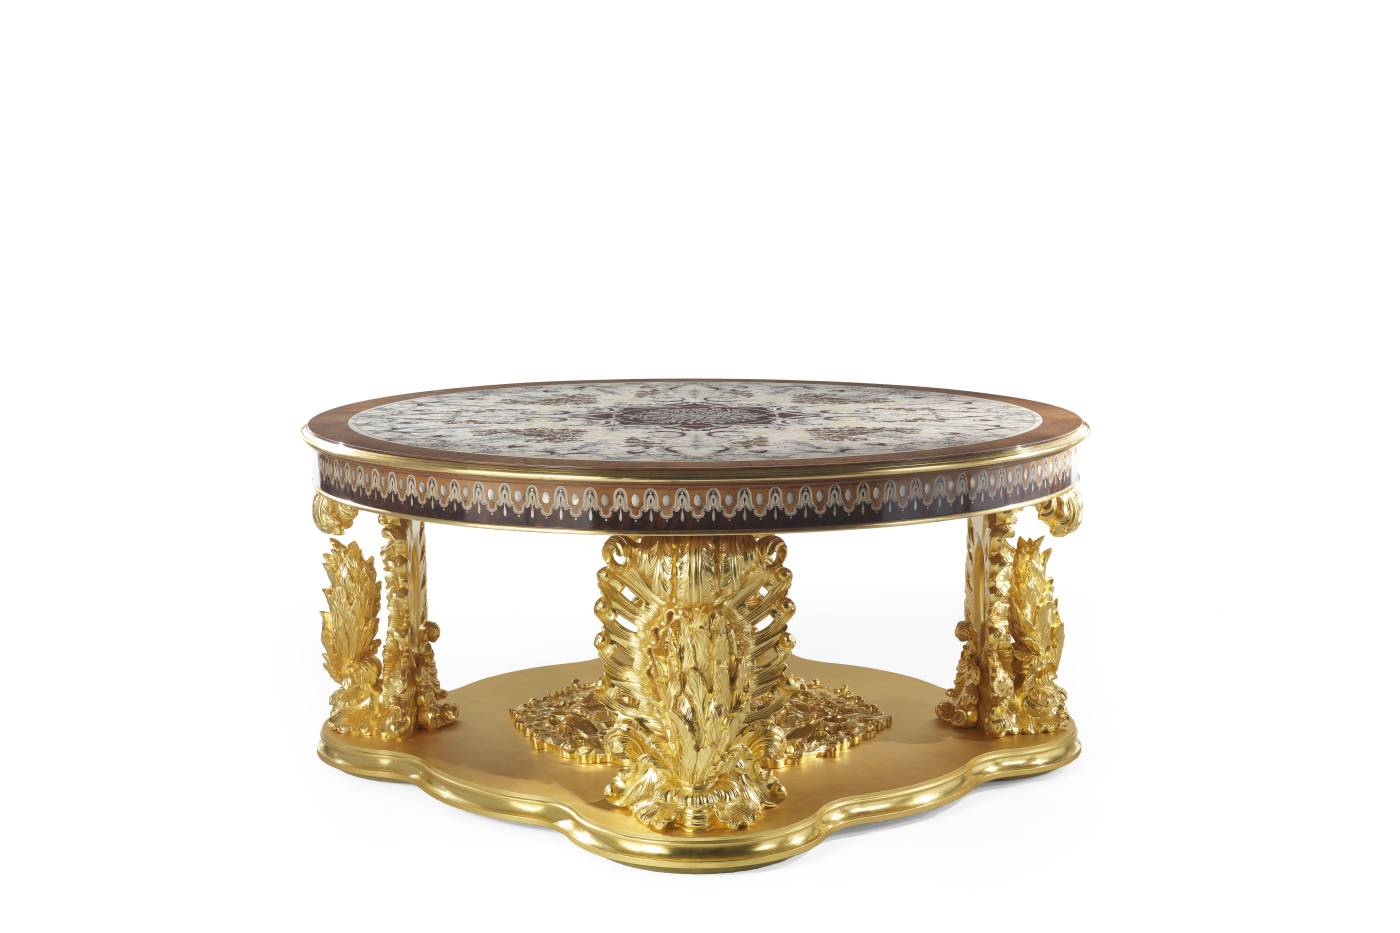 ROSE GARDEN entrance table - Discover the epitome of luxury with the Domus collection by Jumbo Collection, fully custom made for tailor-made projects.